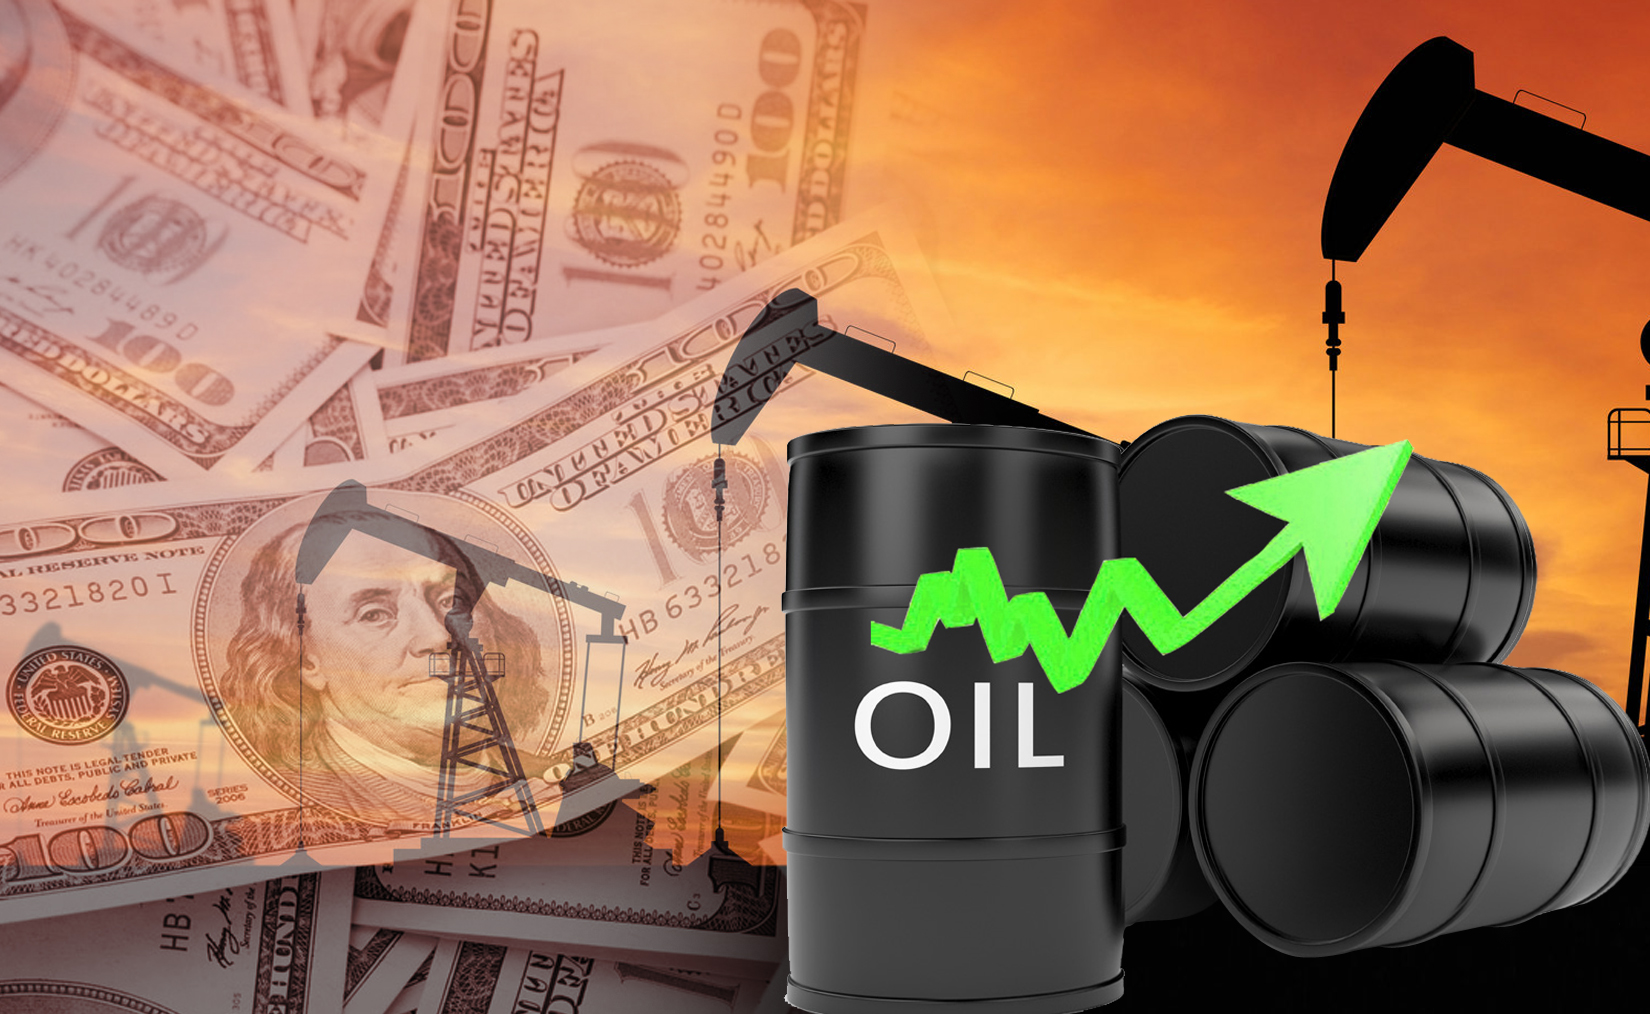 Kuwaiti oil price up 79 cents to stand at USD 59.68 per barrel                                                                                                                                                                                            